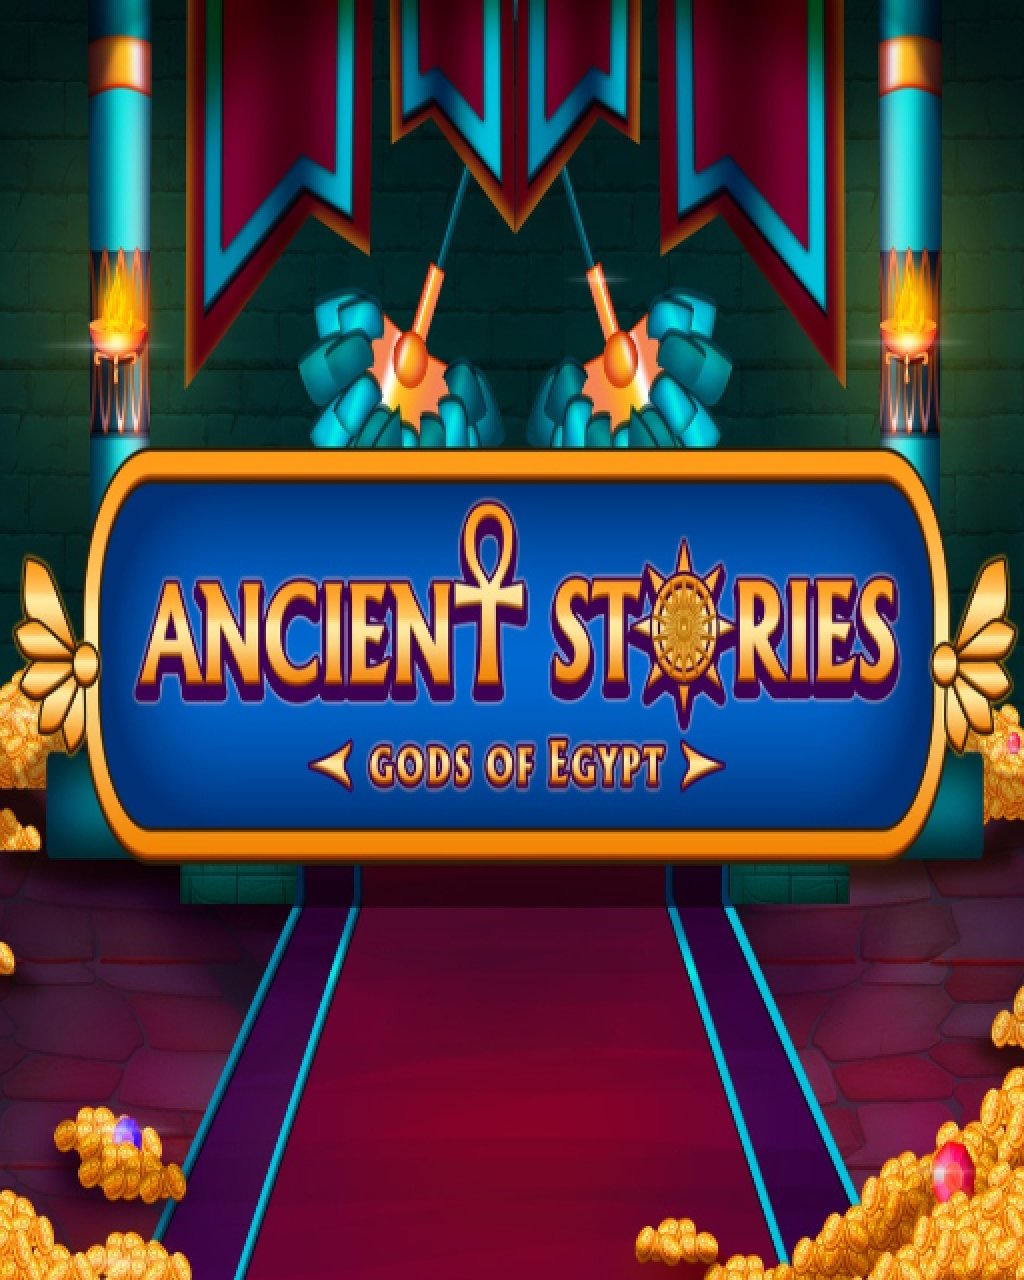 Ancient Stories Gods of Egypt